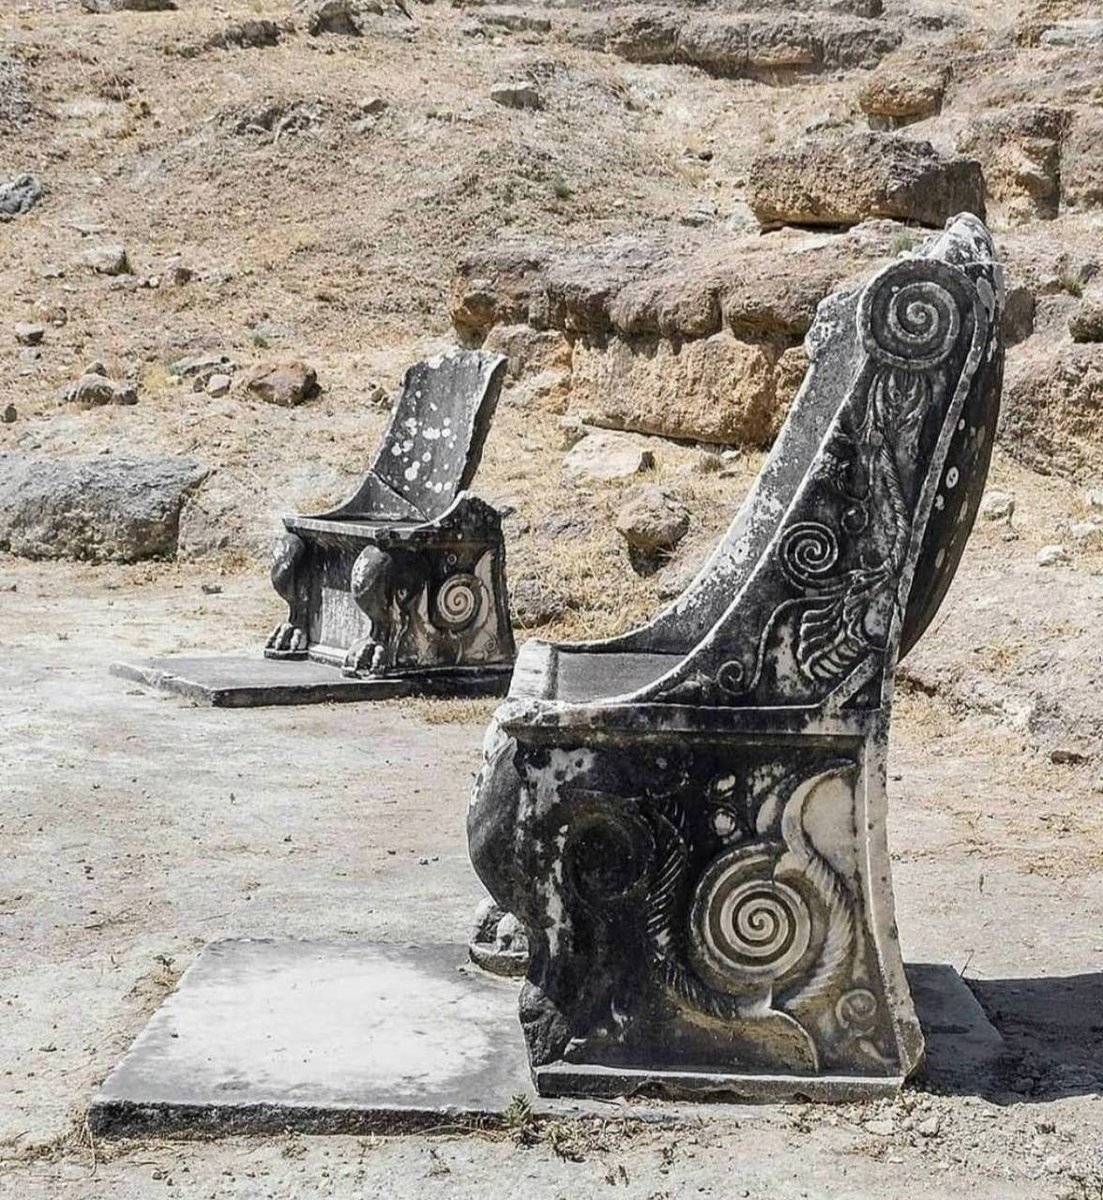 Marble throne chairs at the ancient theater of Oropos (Amphiareion archaeological site), Attica, Greece 👇